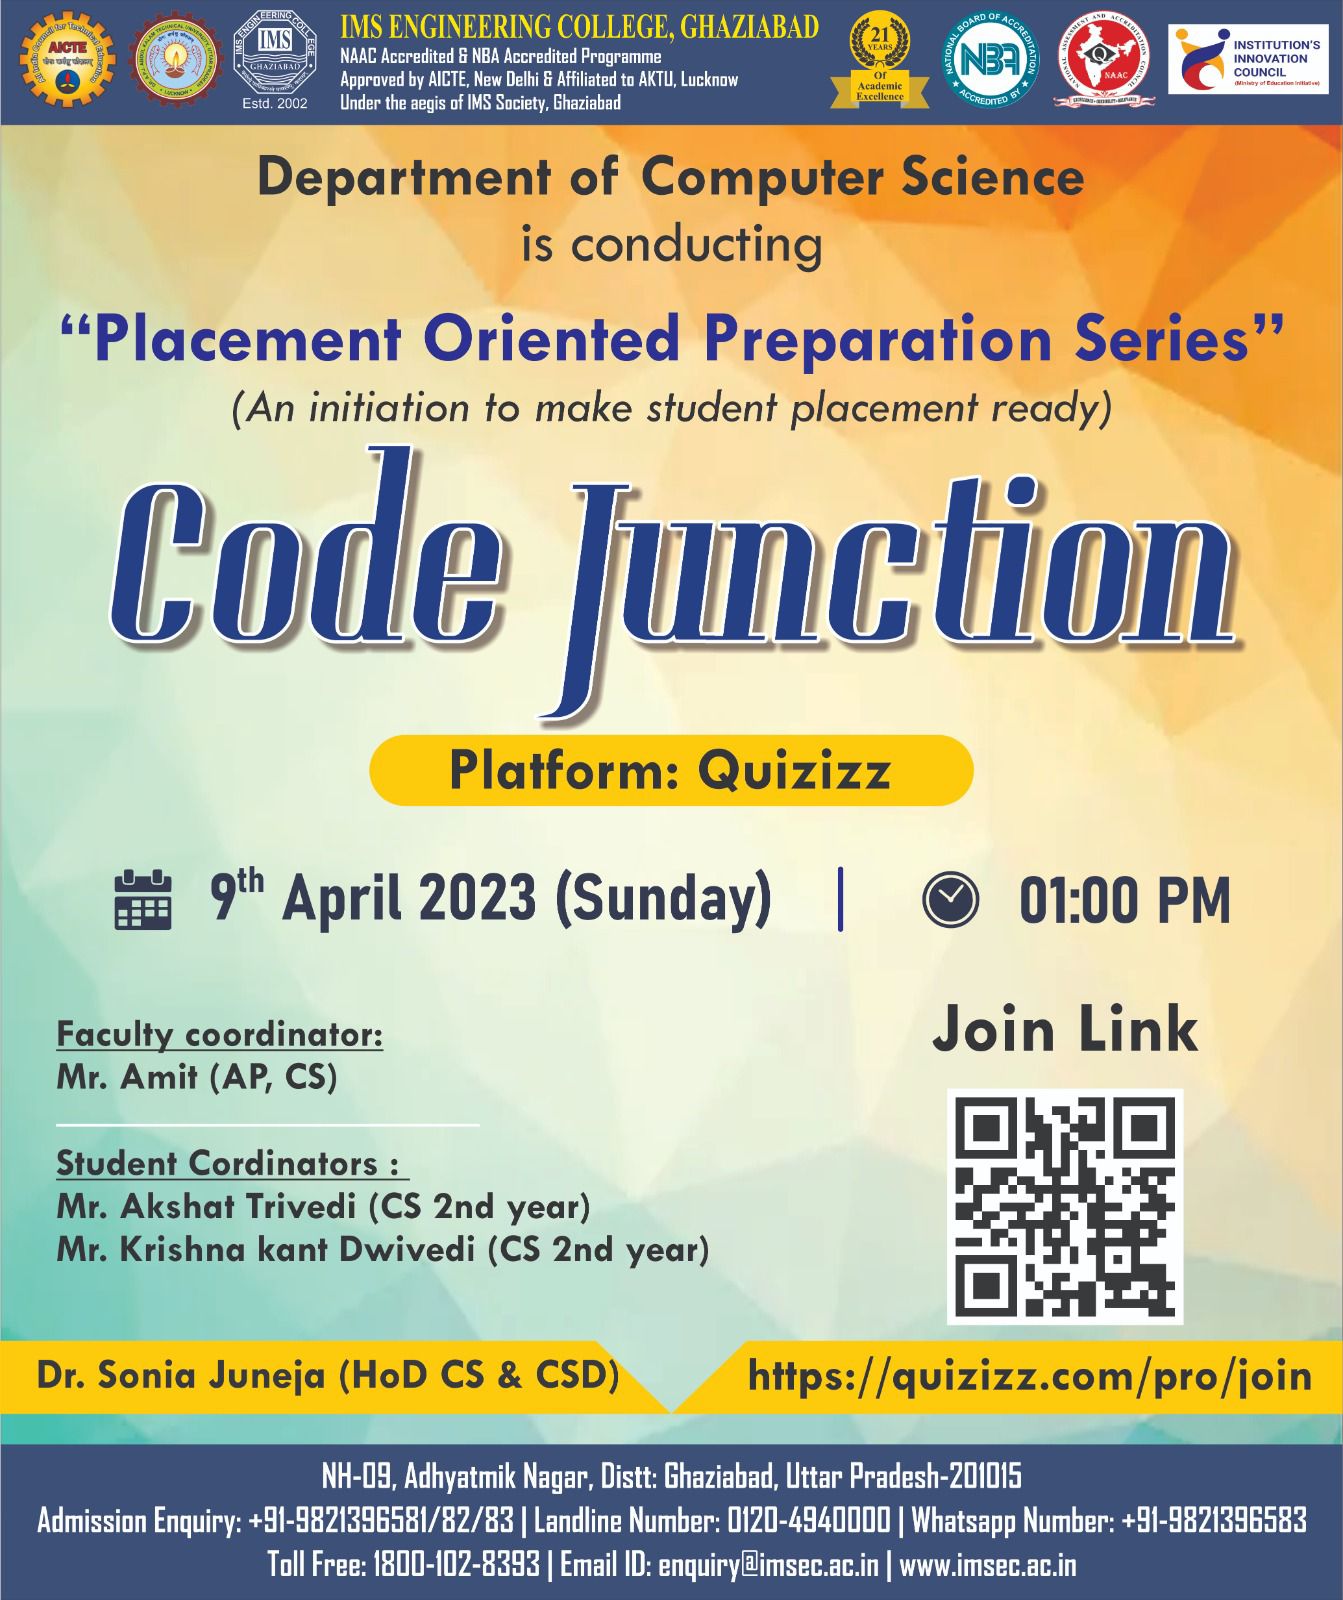 Placement Oriented Preparation Series-An initiative to make students placement ready